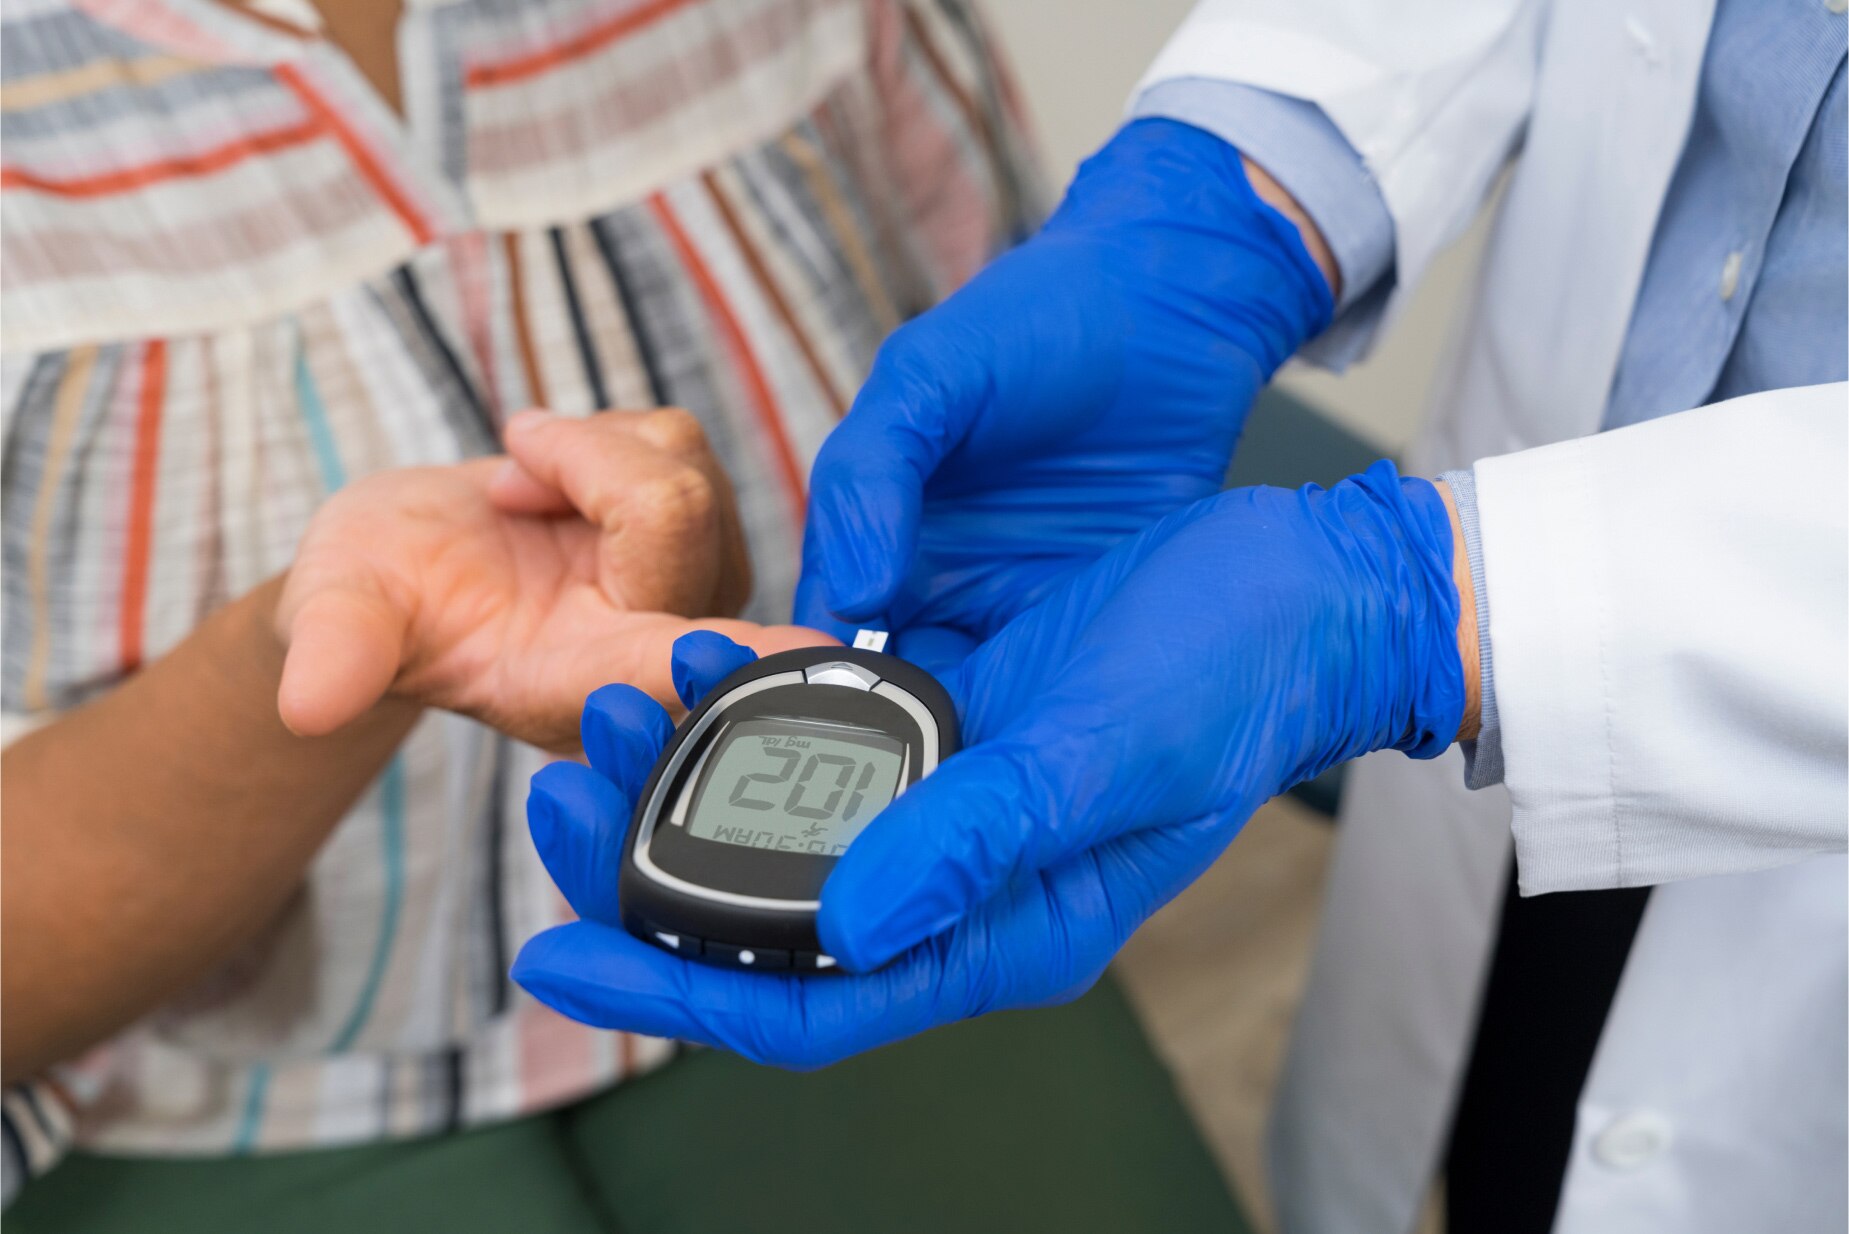 A MinuteClinic provider using a glucometer to read a patient’s blood glucose level in a clinical setting.